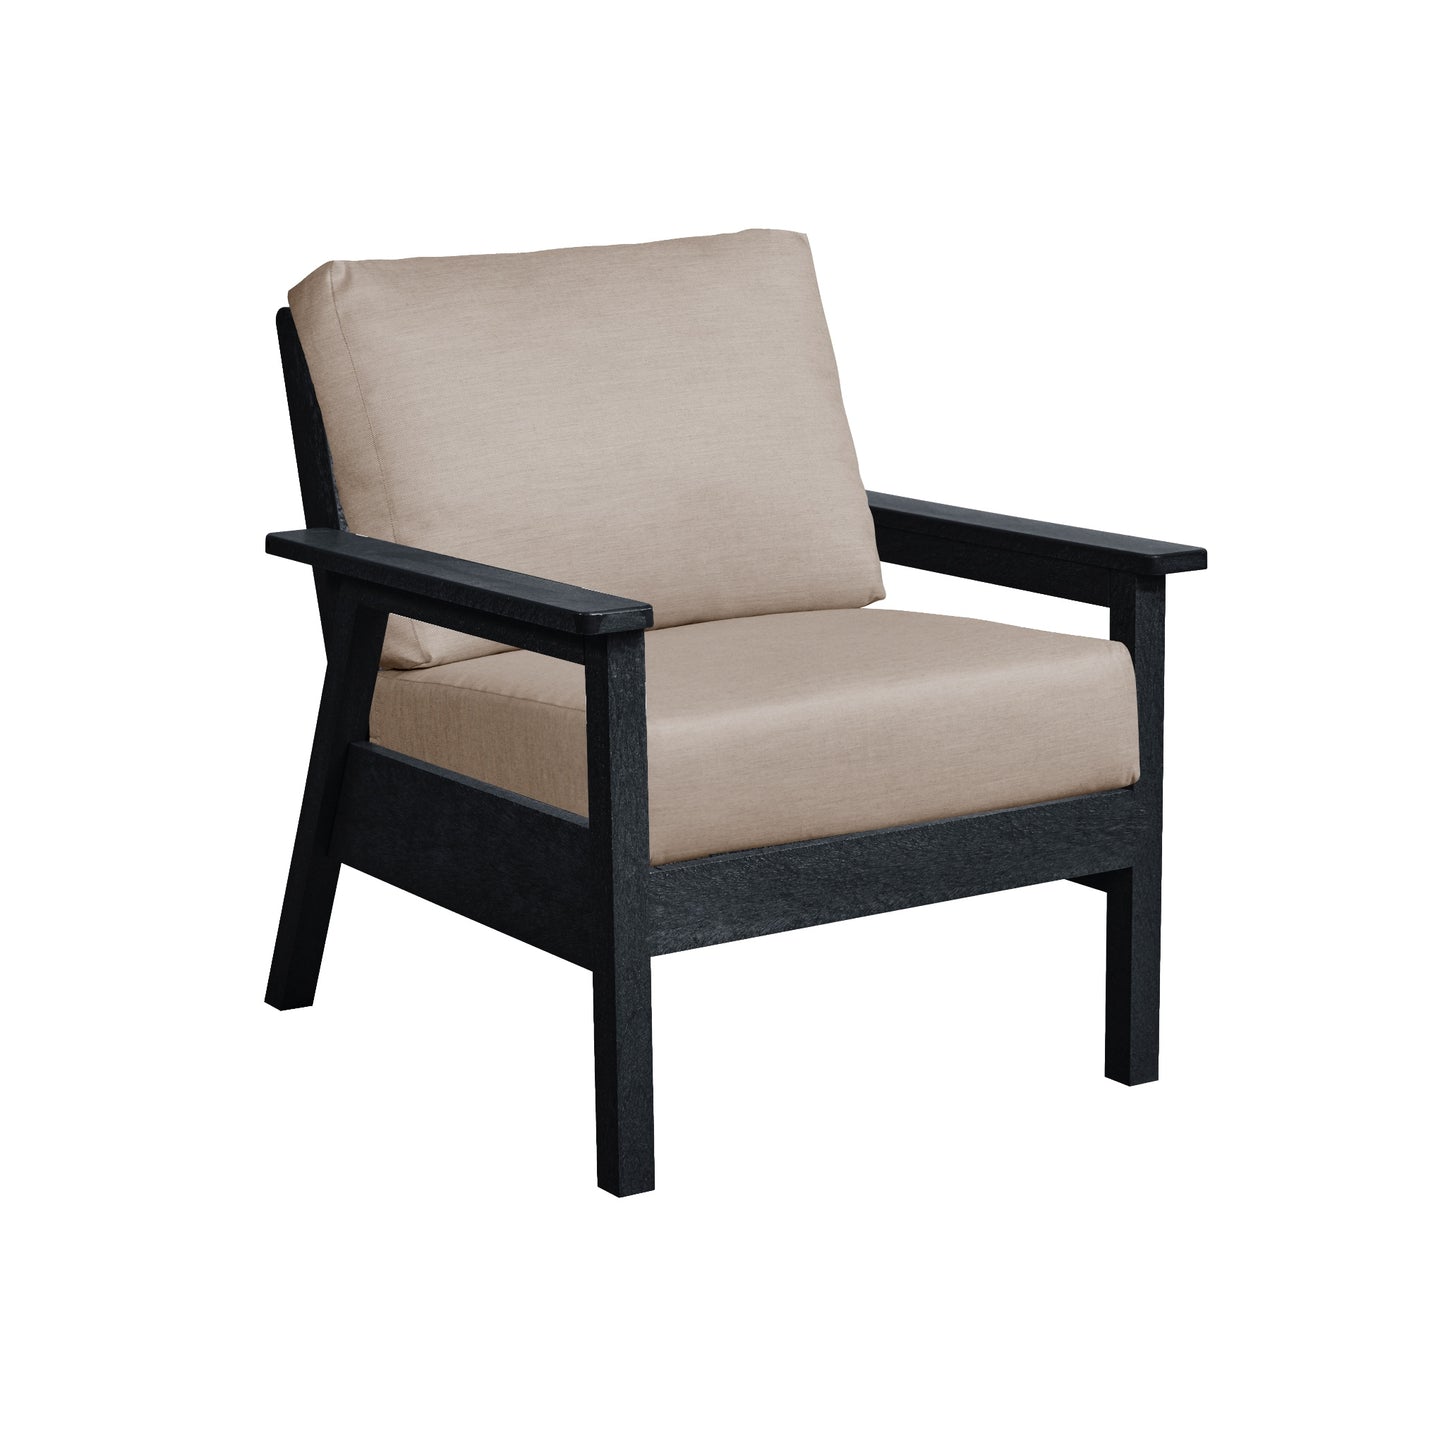 Tofino Chair Black FRAME WITH CUSHIONS - DSF281 [DSF241]